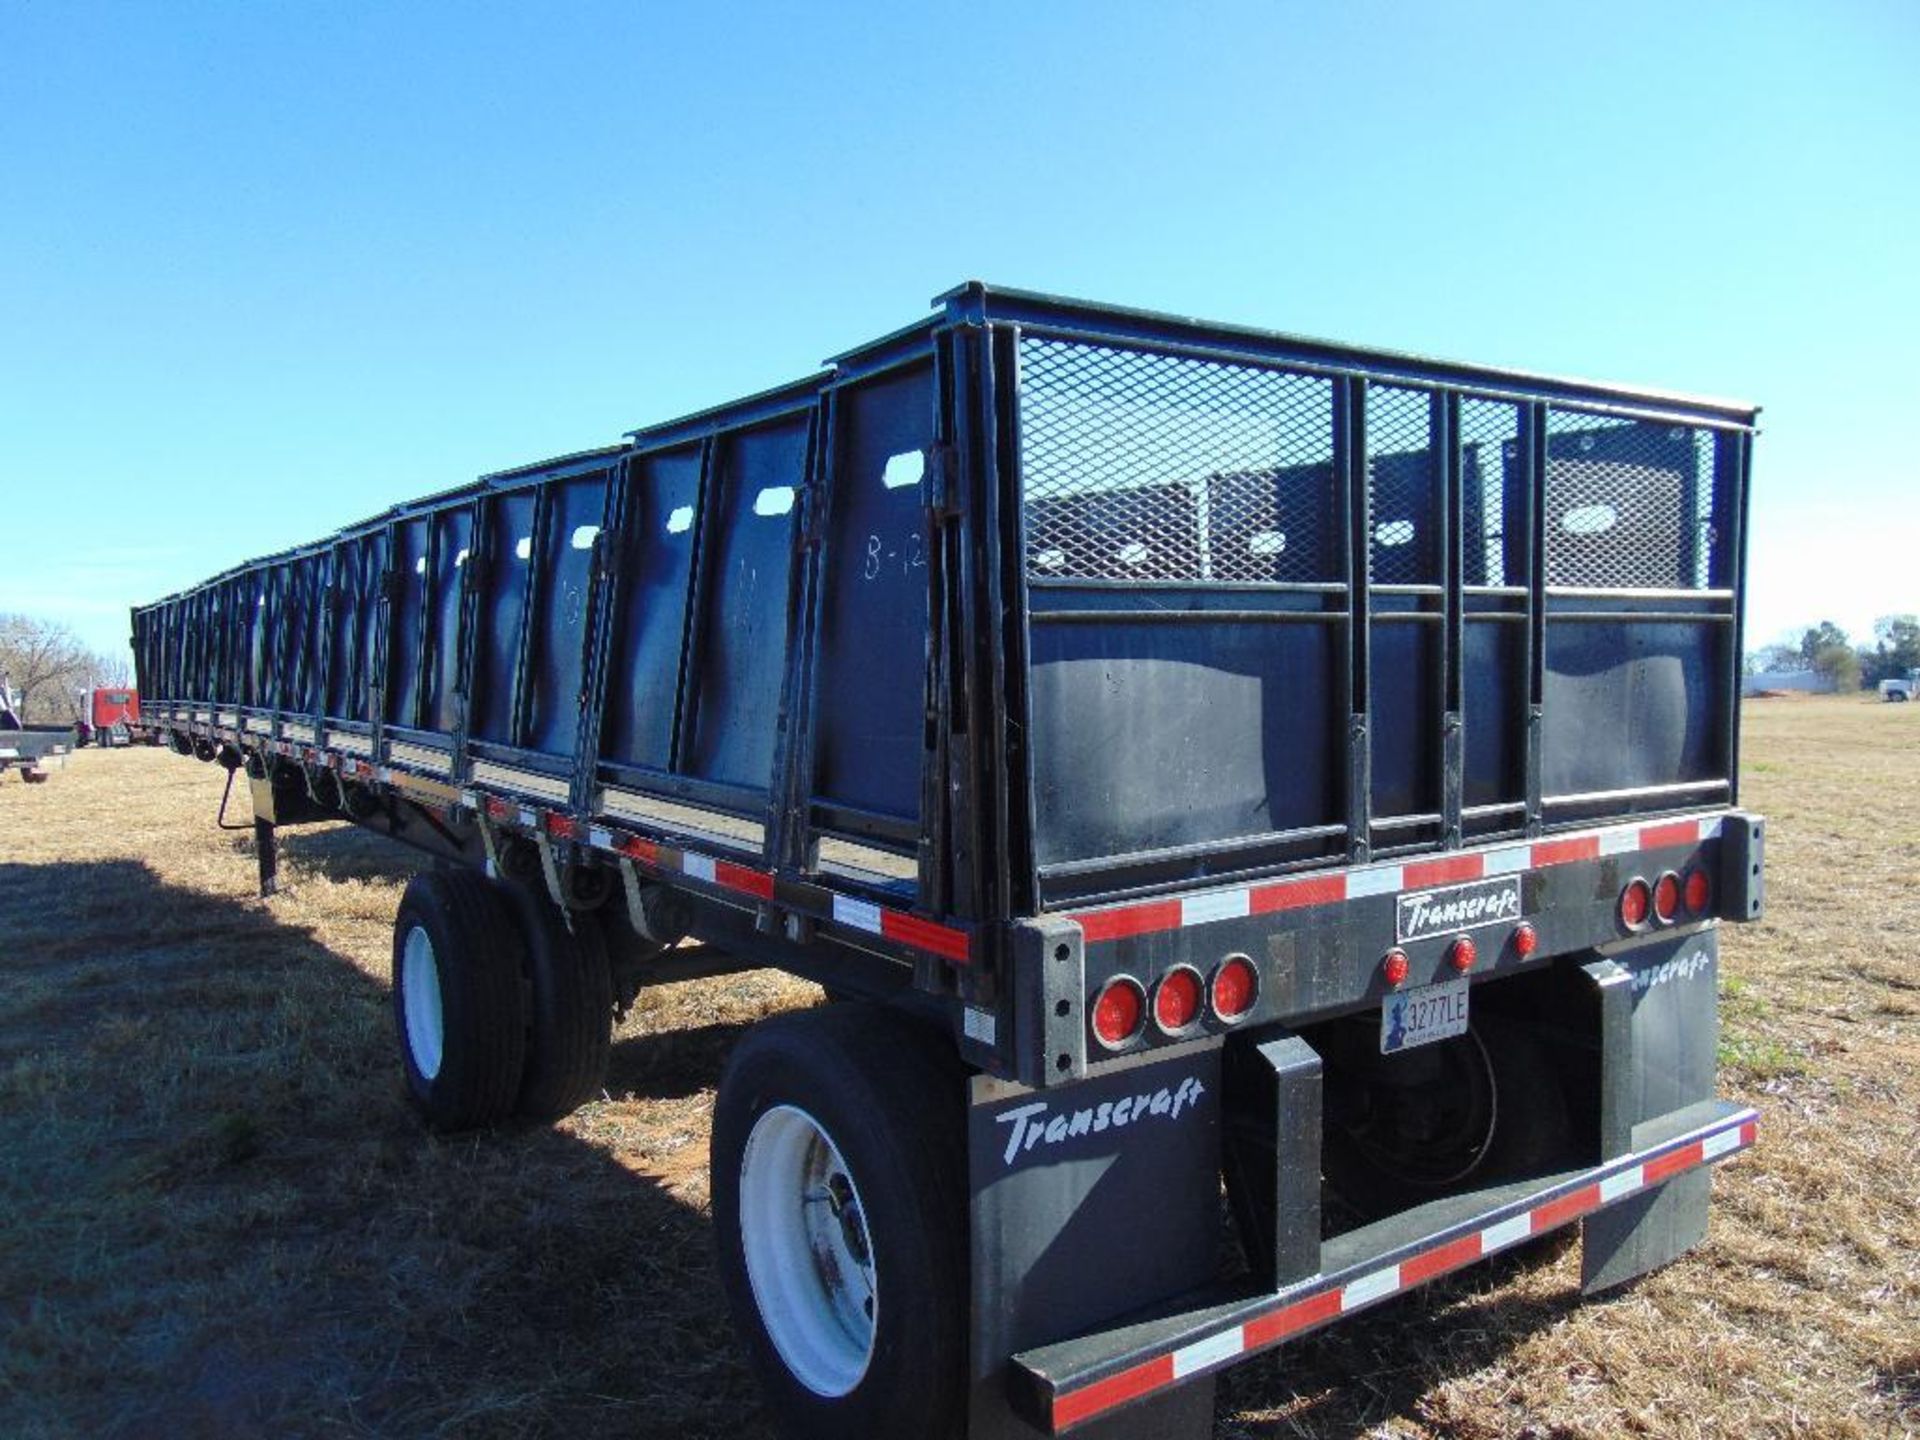 2015 Transcraft 48' Spread Axle w/3' removable sides, s/n 1ttf482sxi3885072 - Image 5 of 8